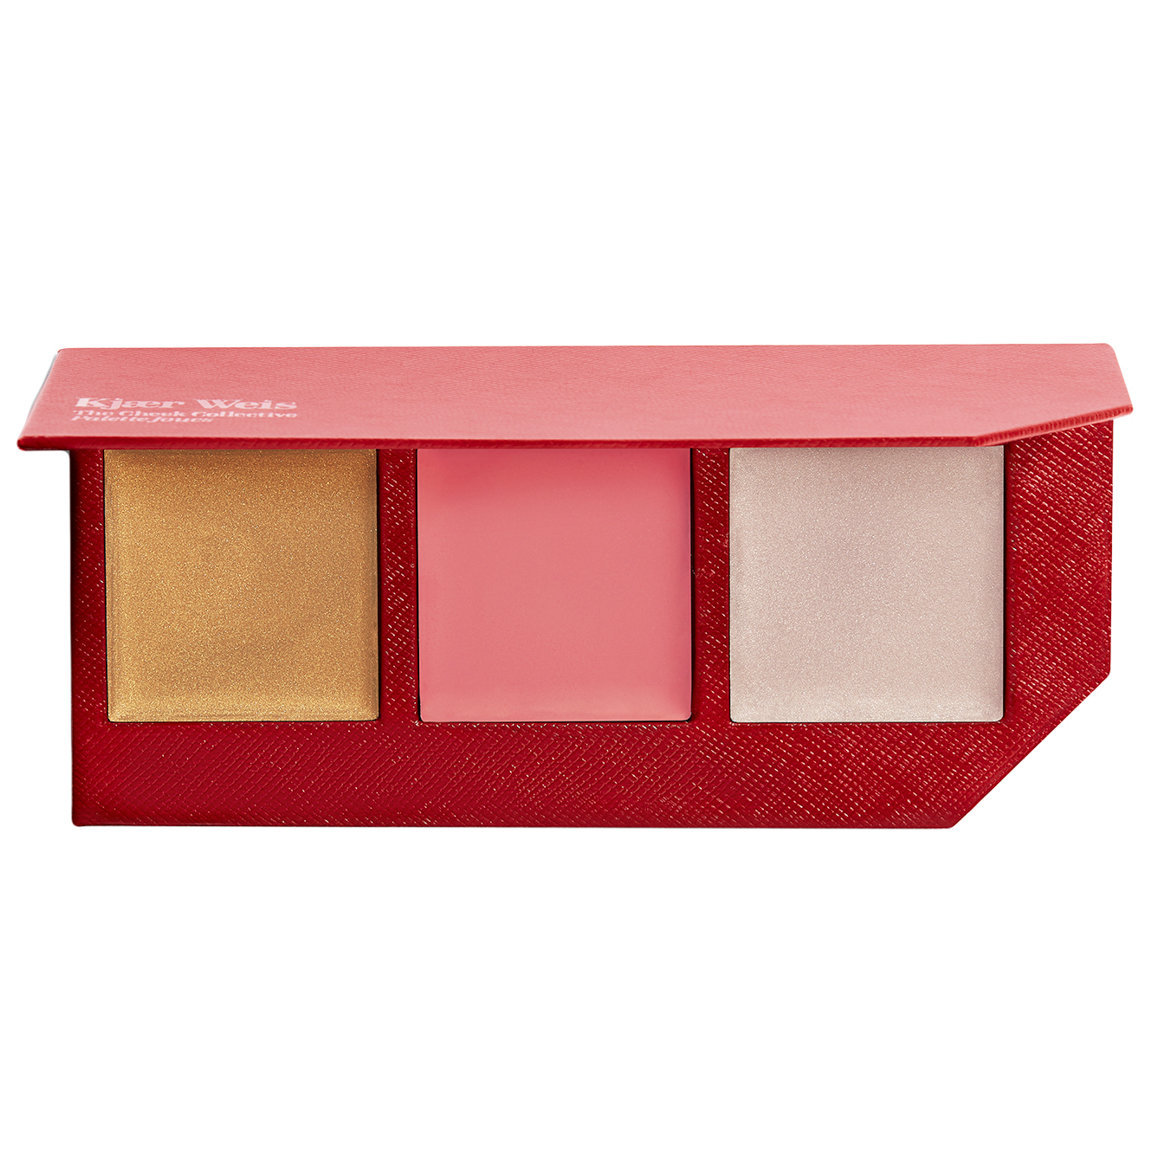 Kjaer Weis The Cheek Collective Blossoming alternative view 1 - product swatch.